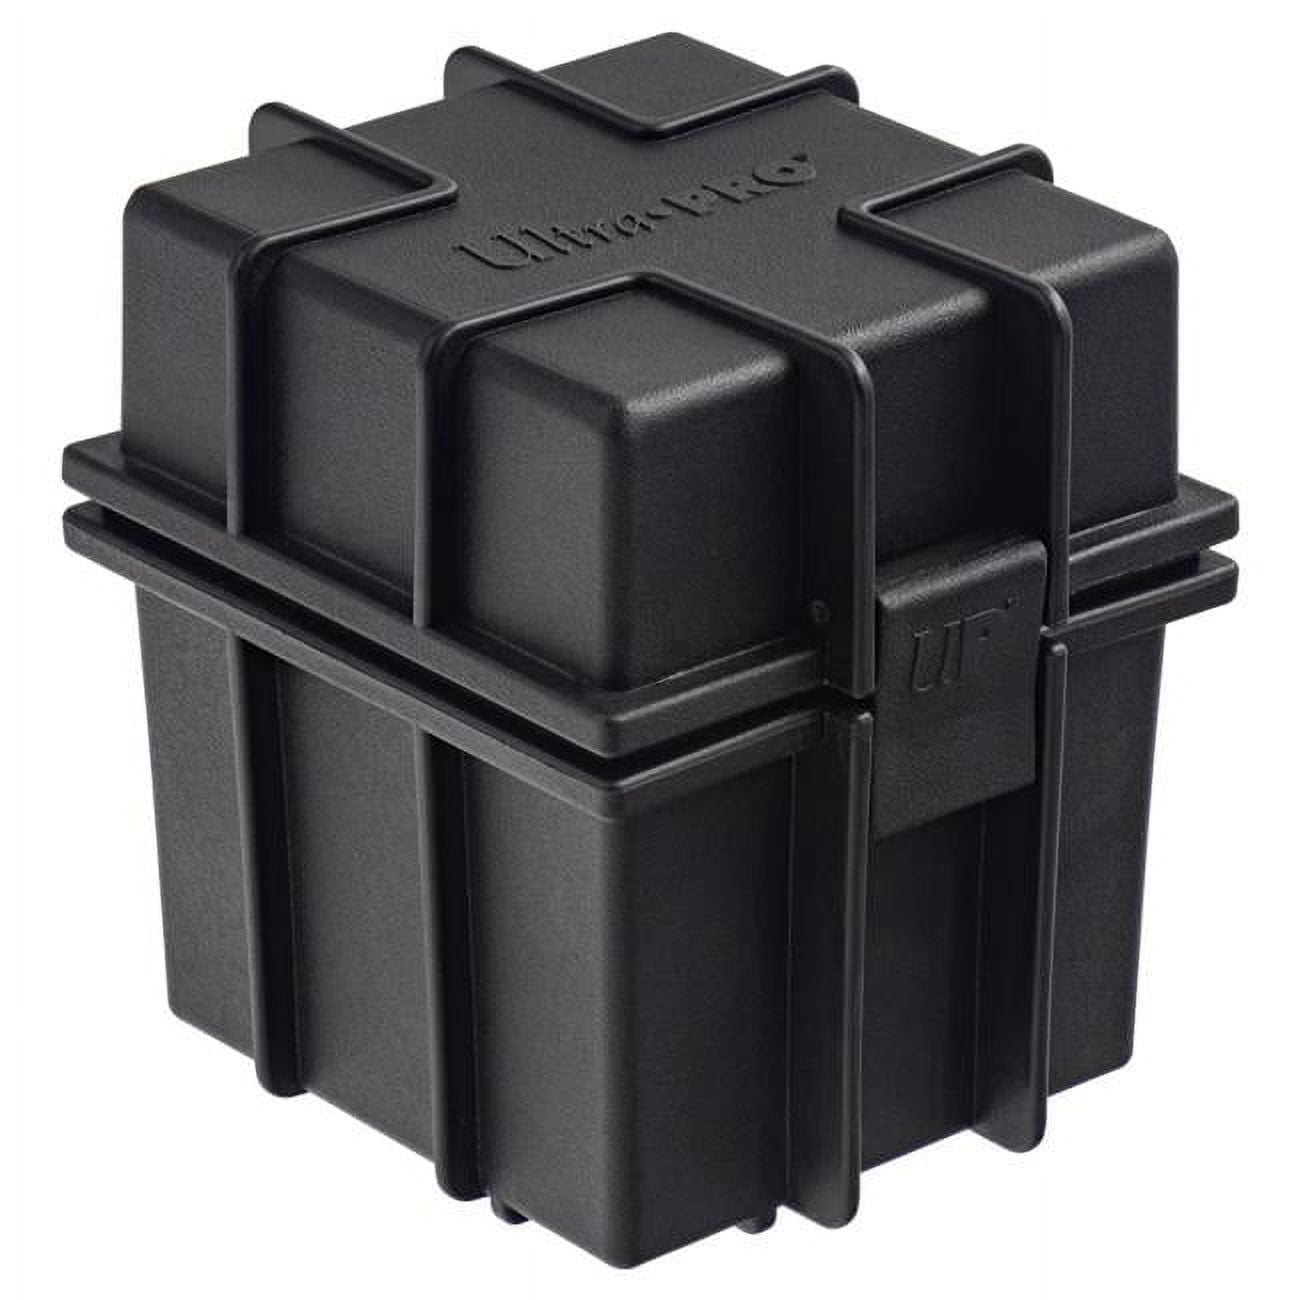 TCB-BLK Storage Box for Photos or Trading Cards